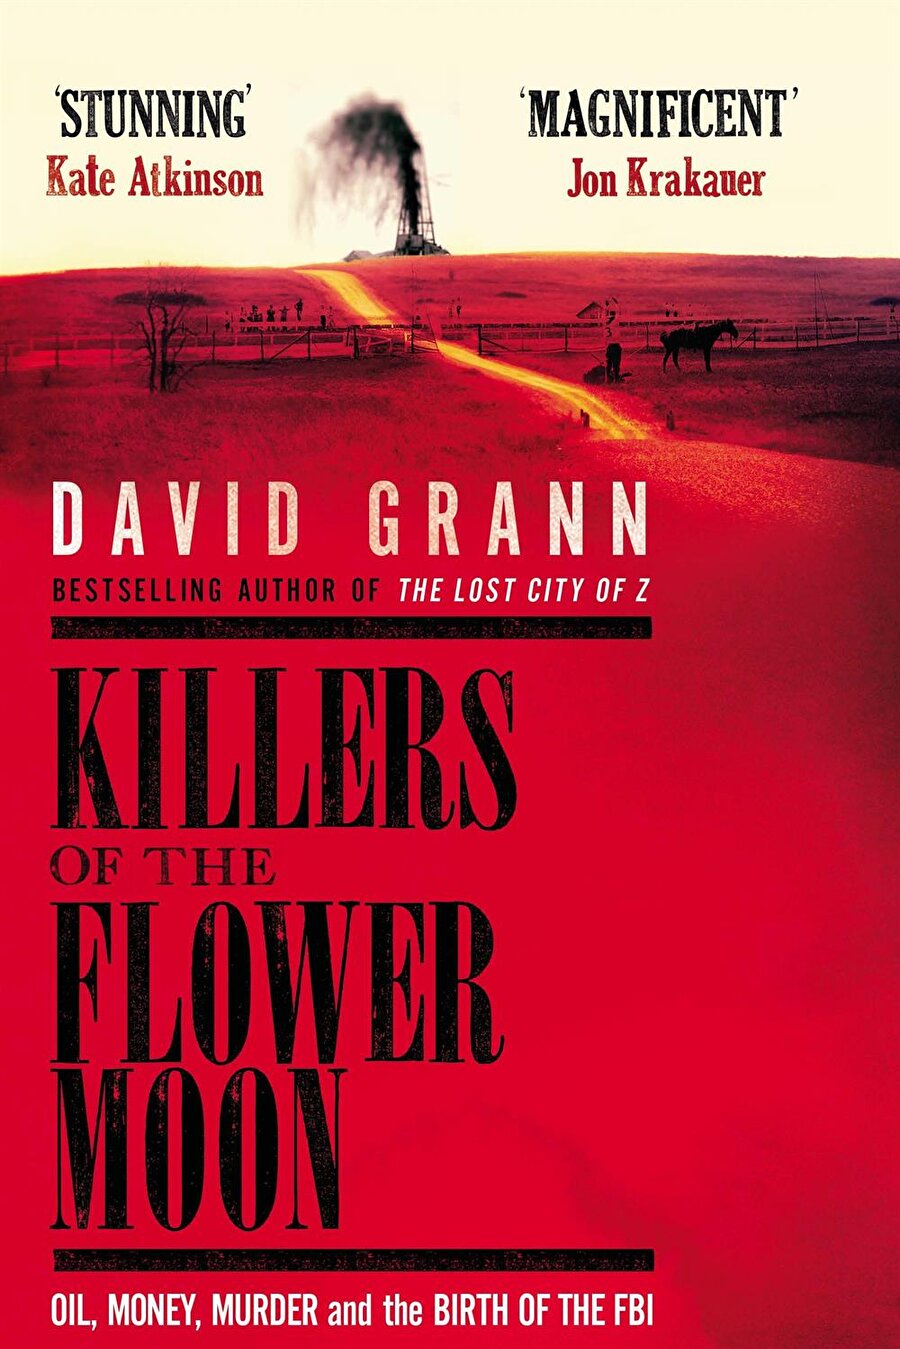 David Grann
"Killers of the Flower Moon: The Osage Murders and the Birth of the FBI"